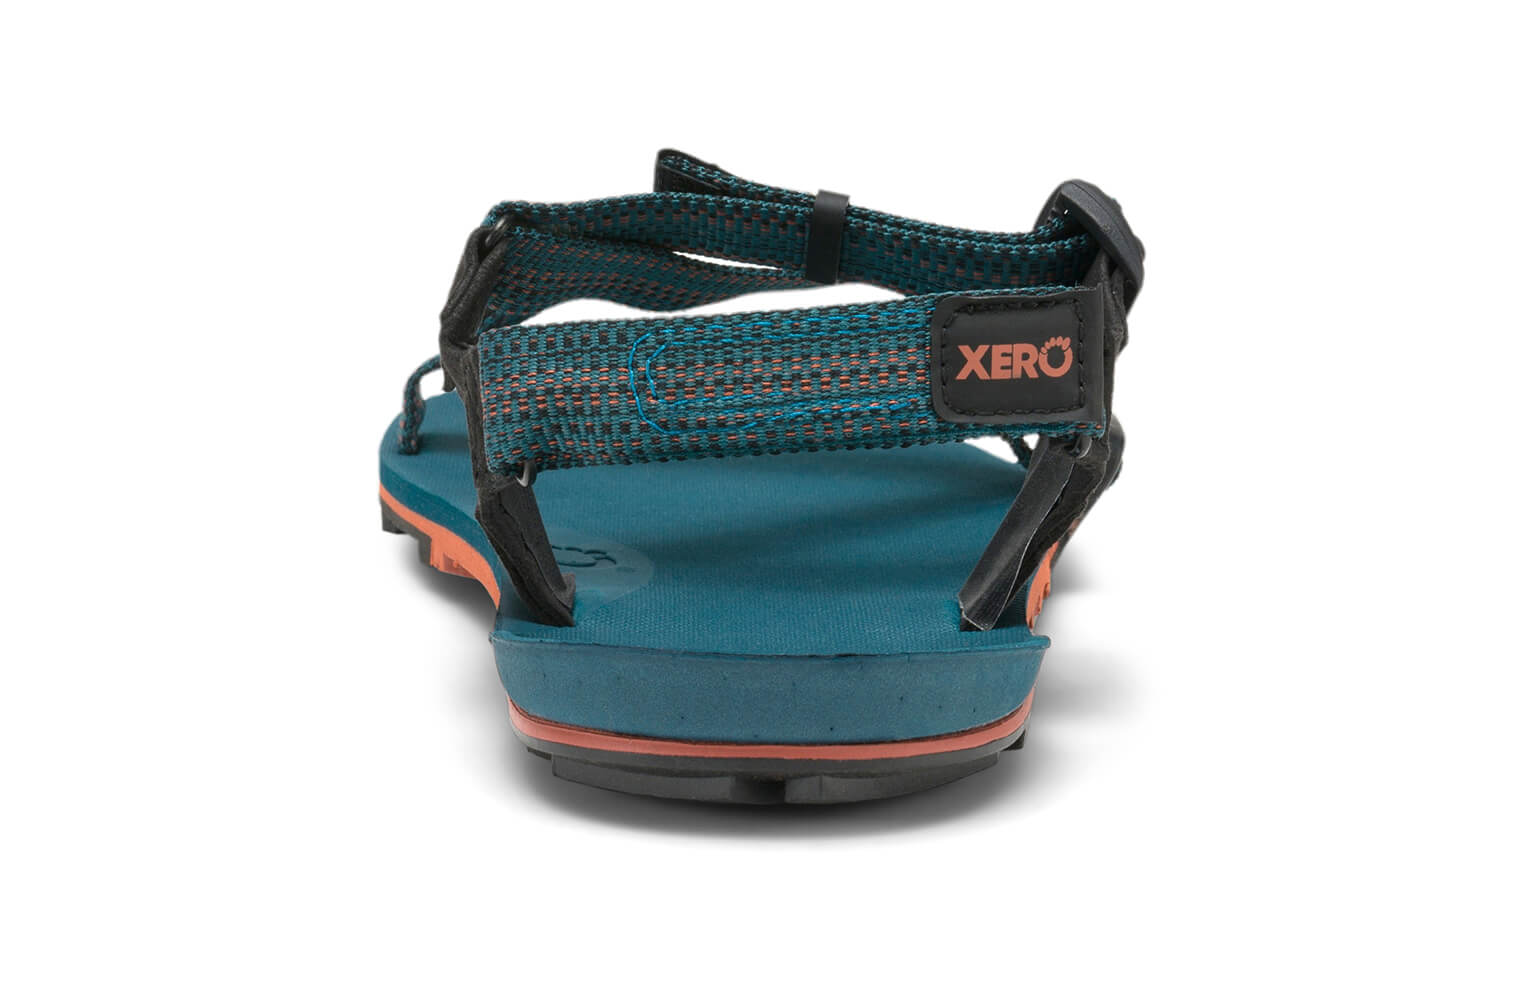 Xero Shoes Size Guide, How to Fit Your Xero's